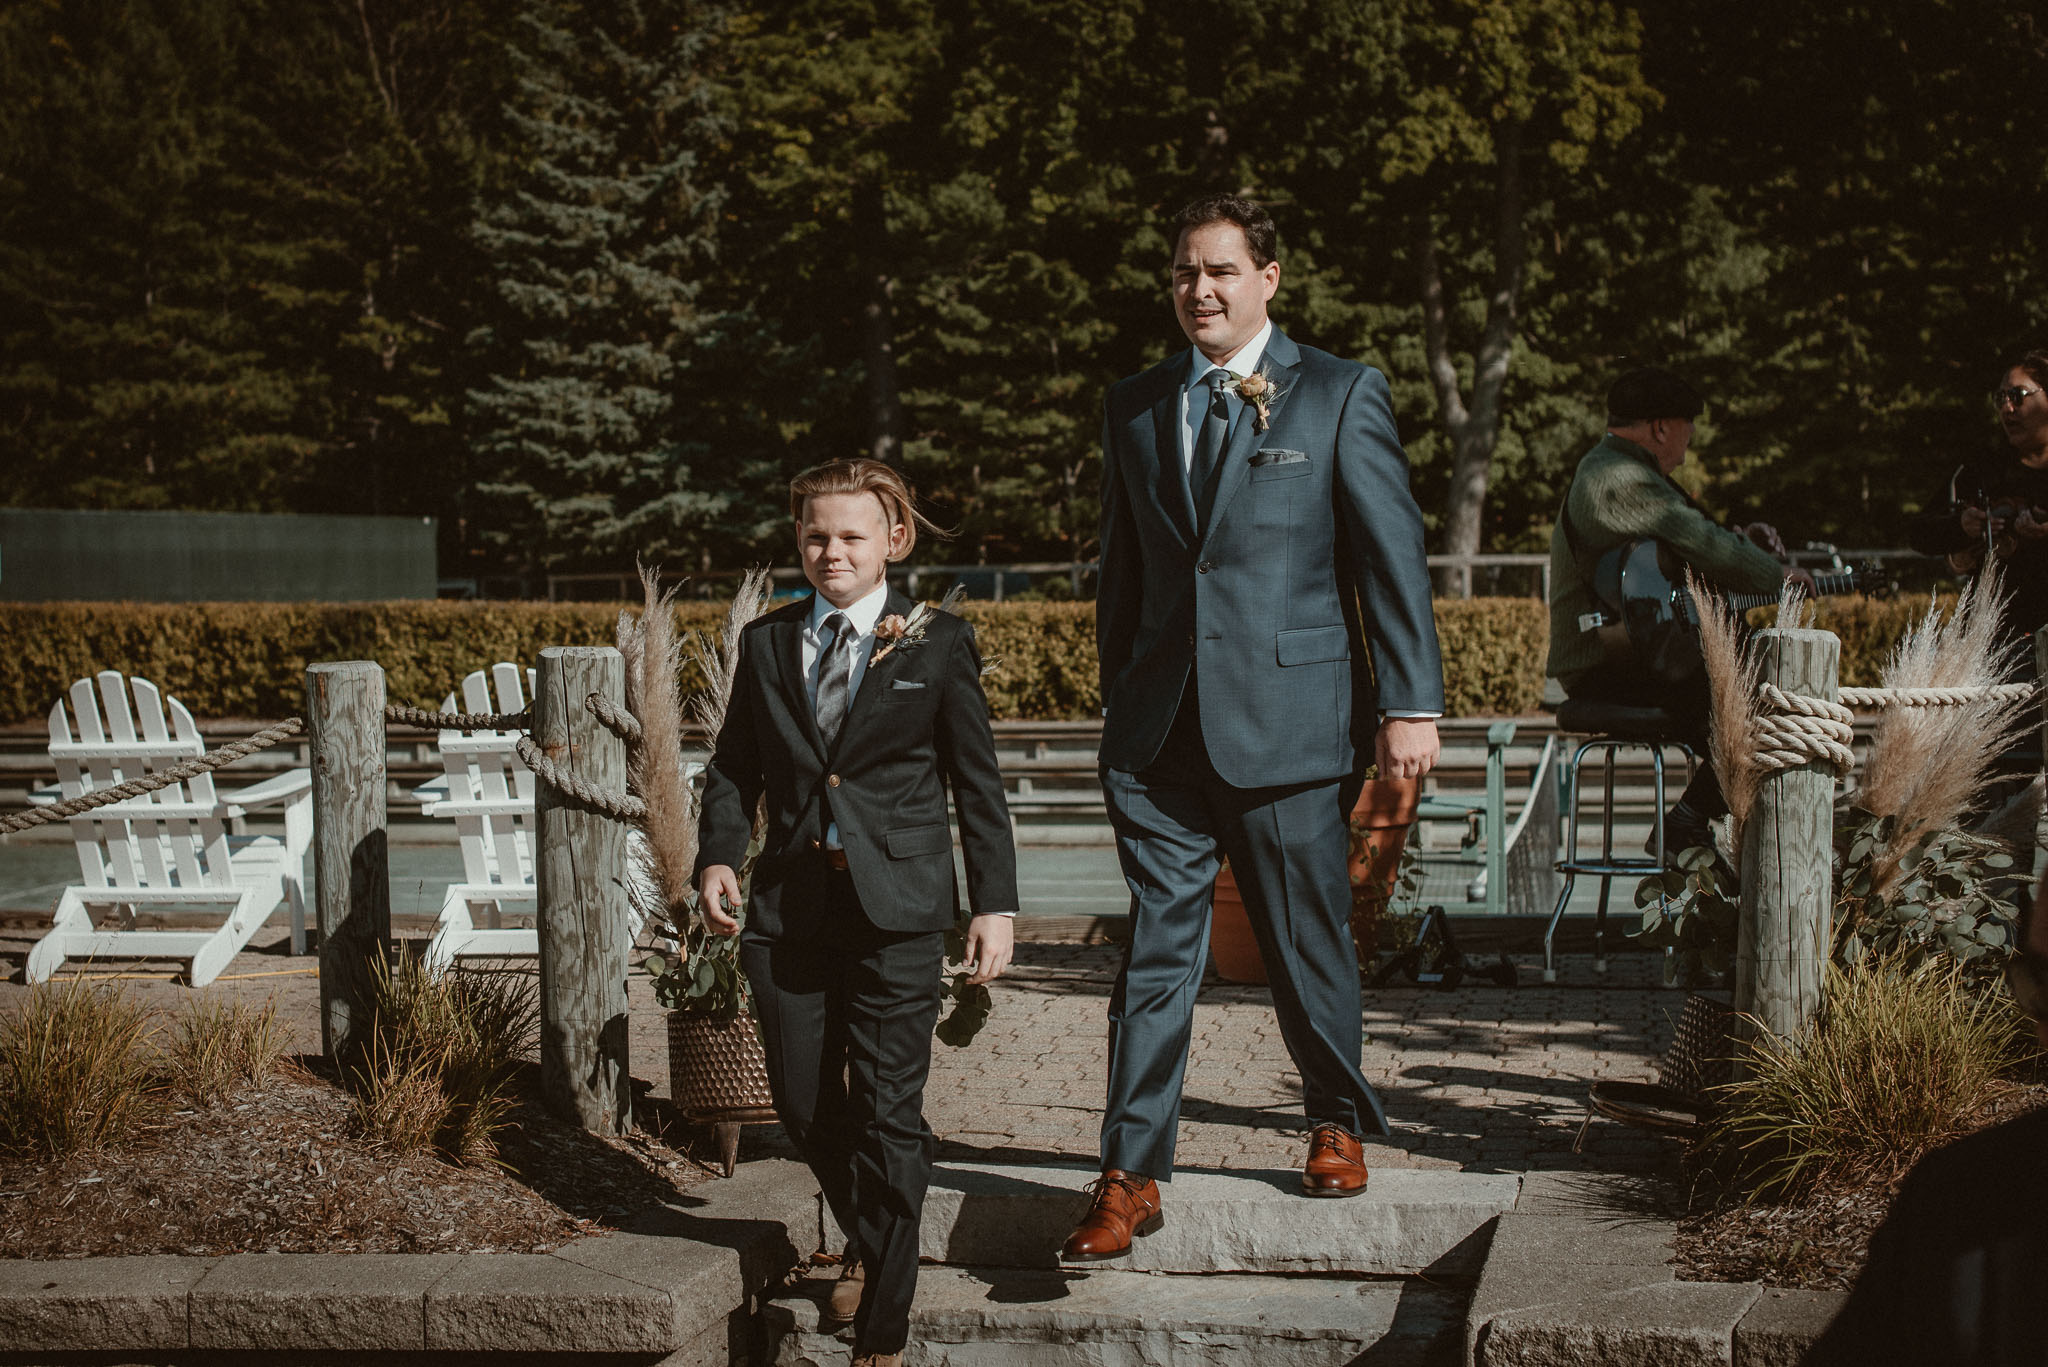 The groom's son and best friend as best men walking down the isle.